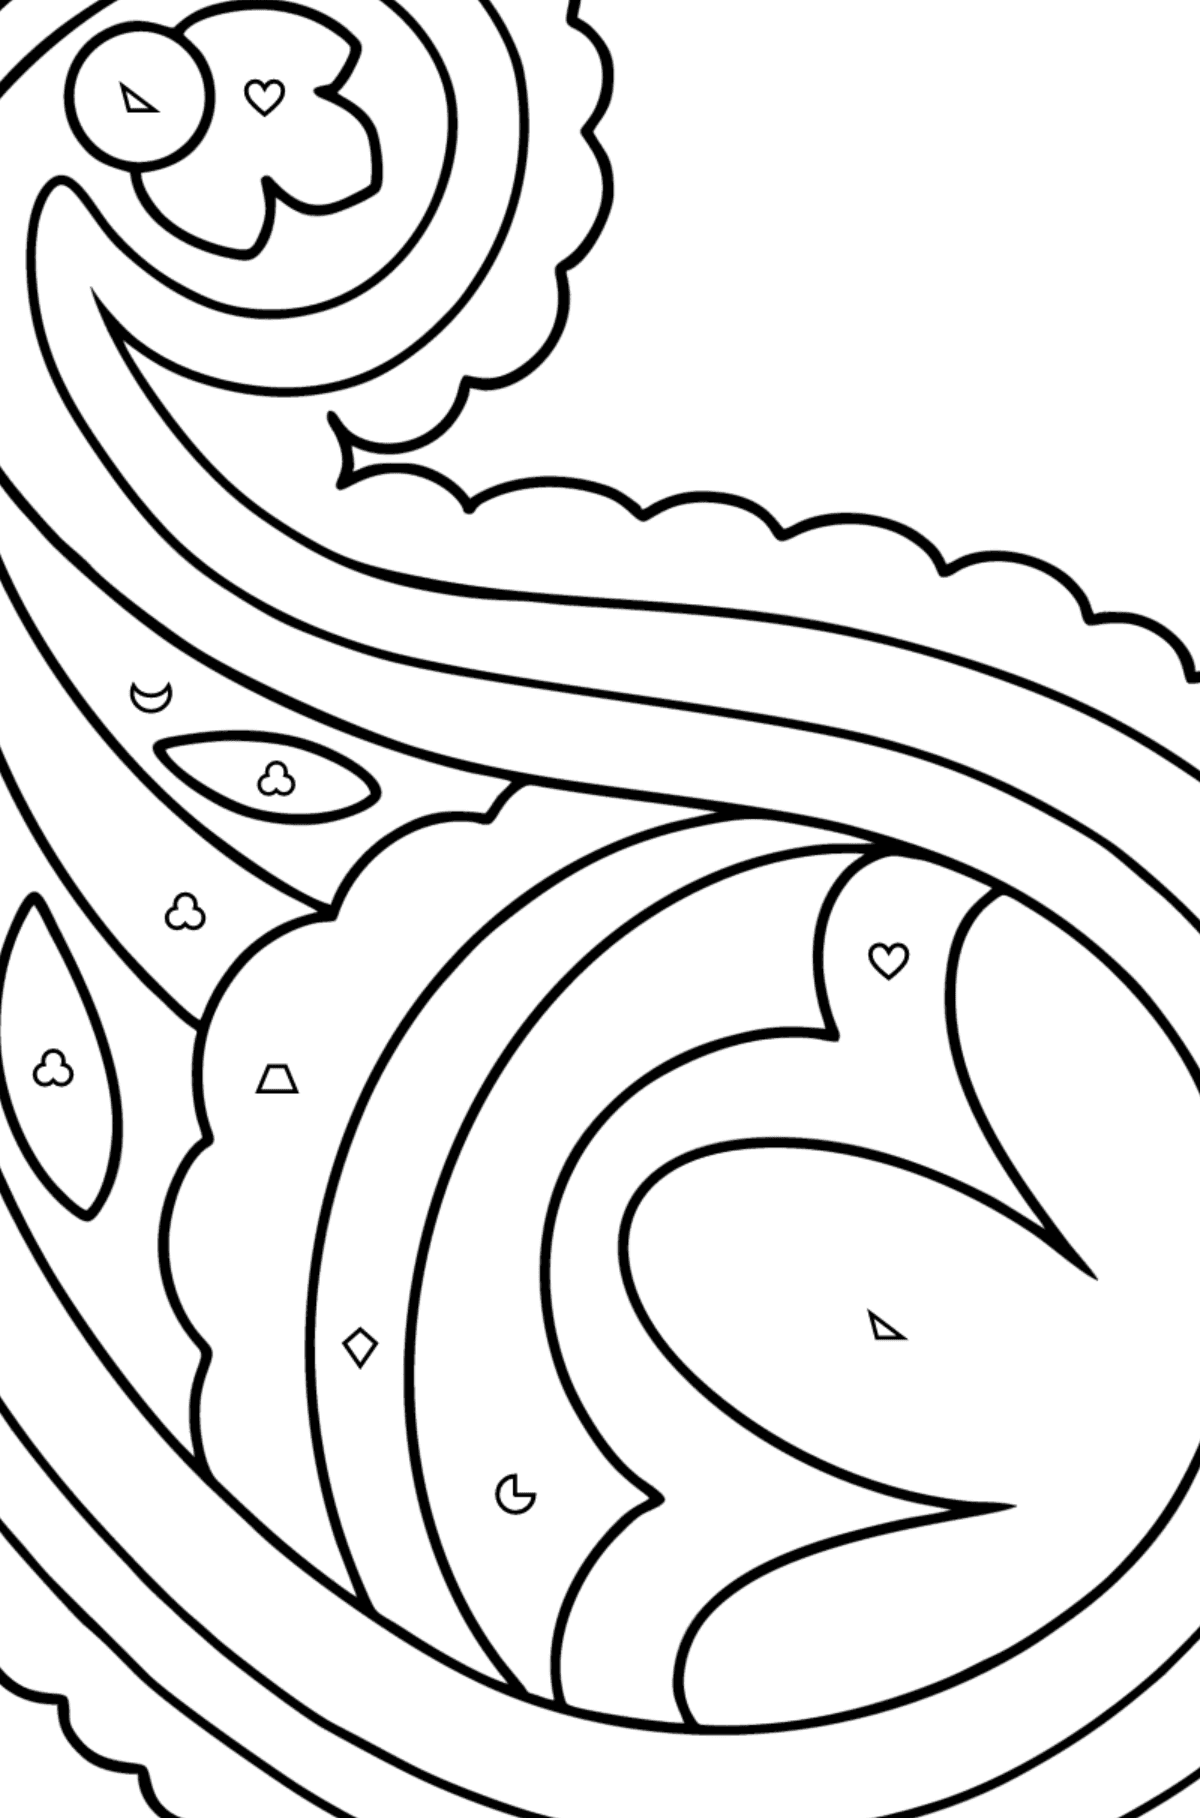 Paisley coloring page - 16 Elements - Coloring by Geometric Shapes for Kids